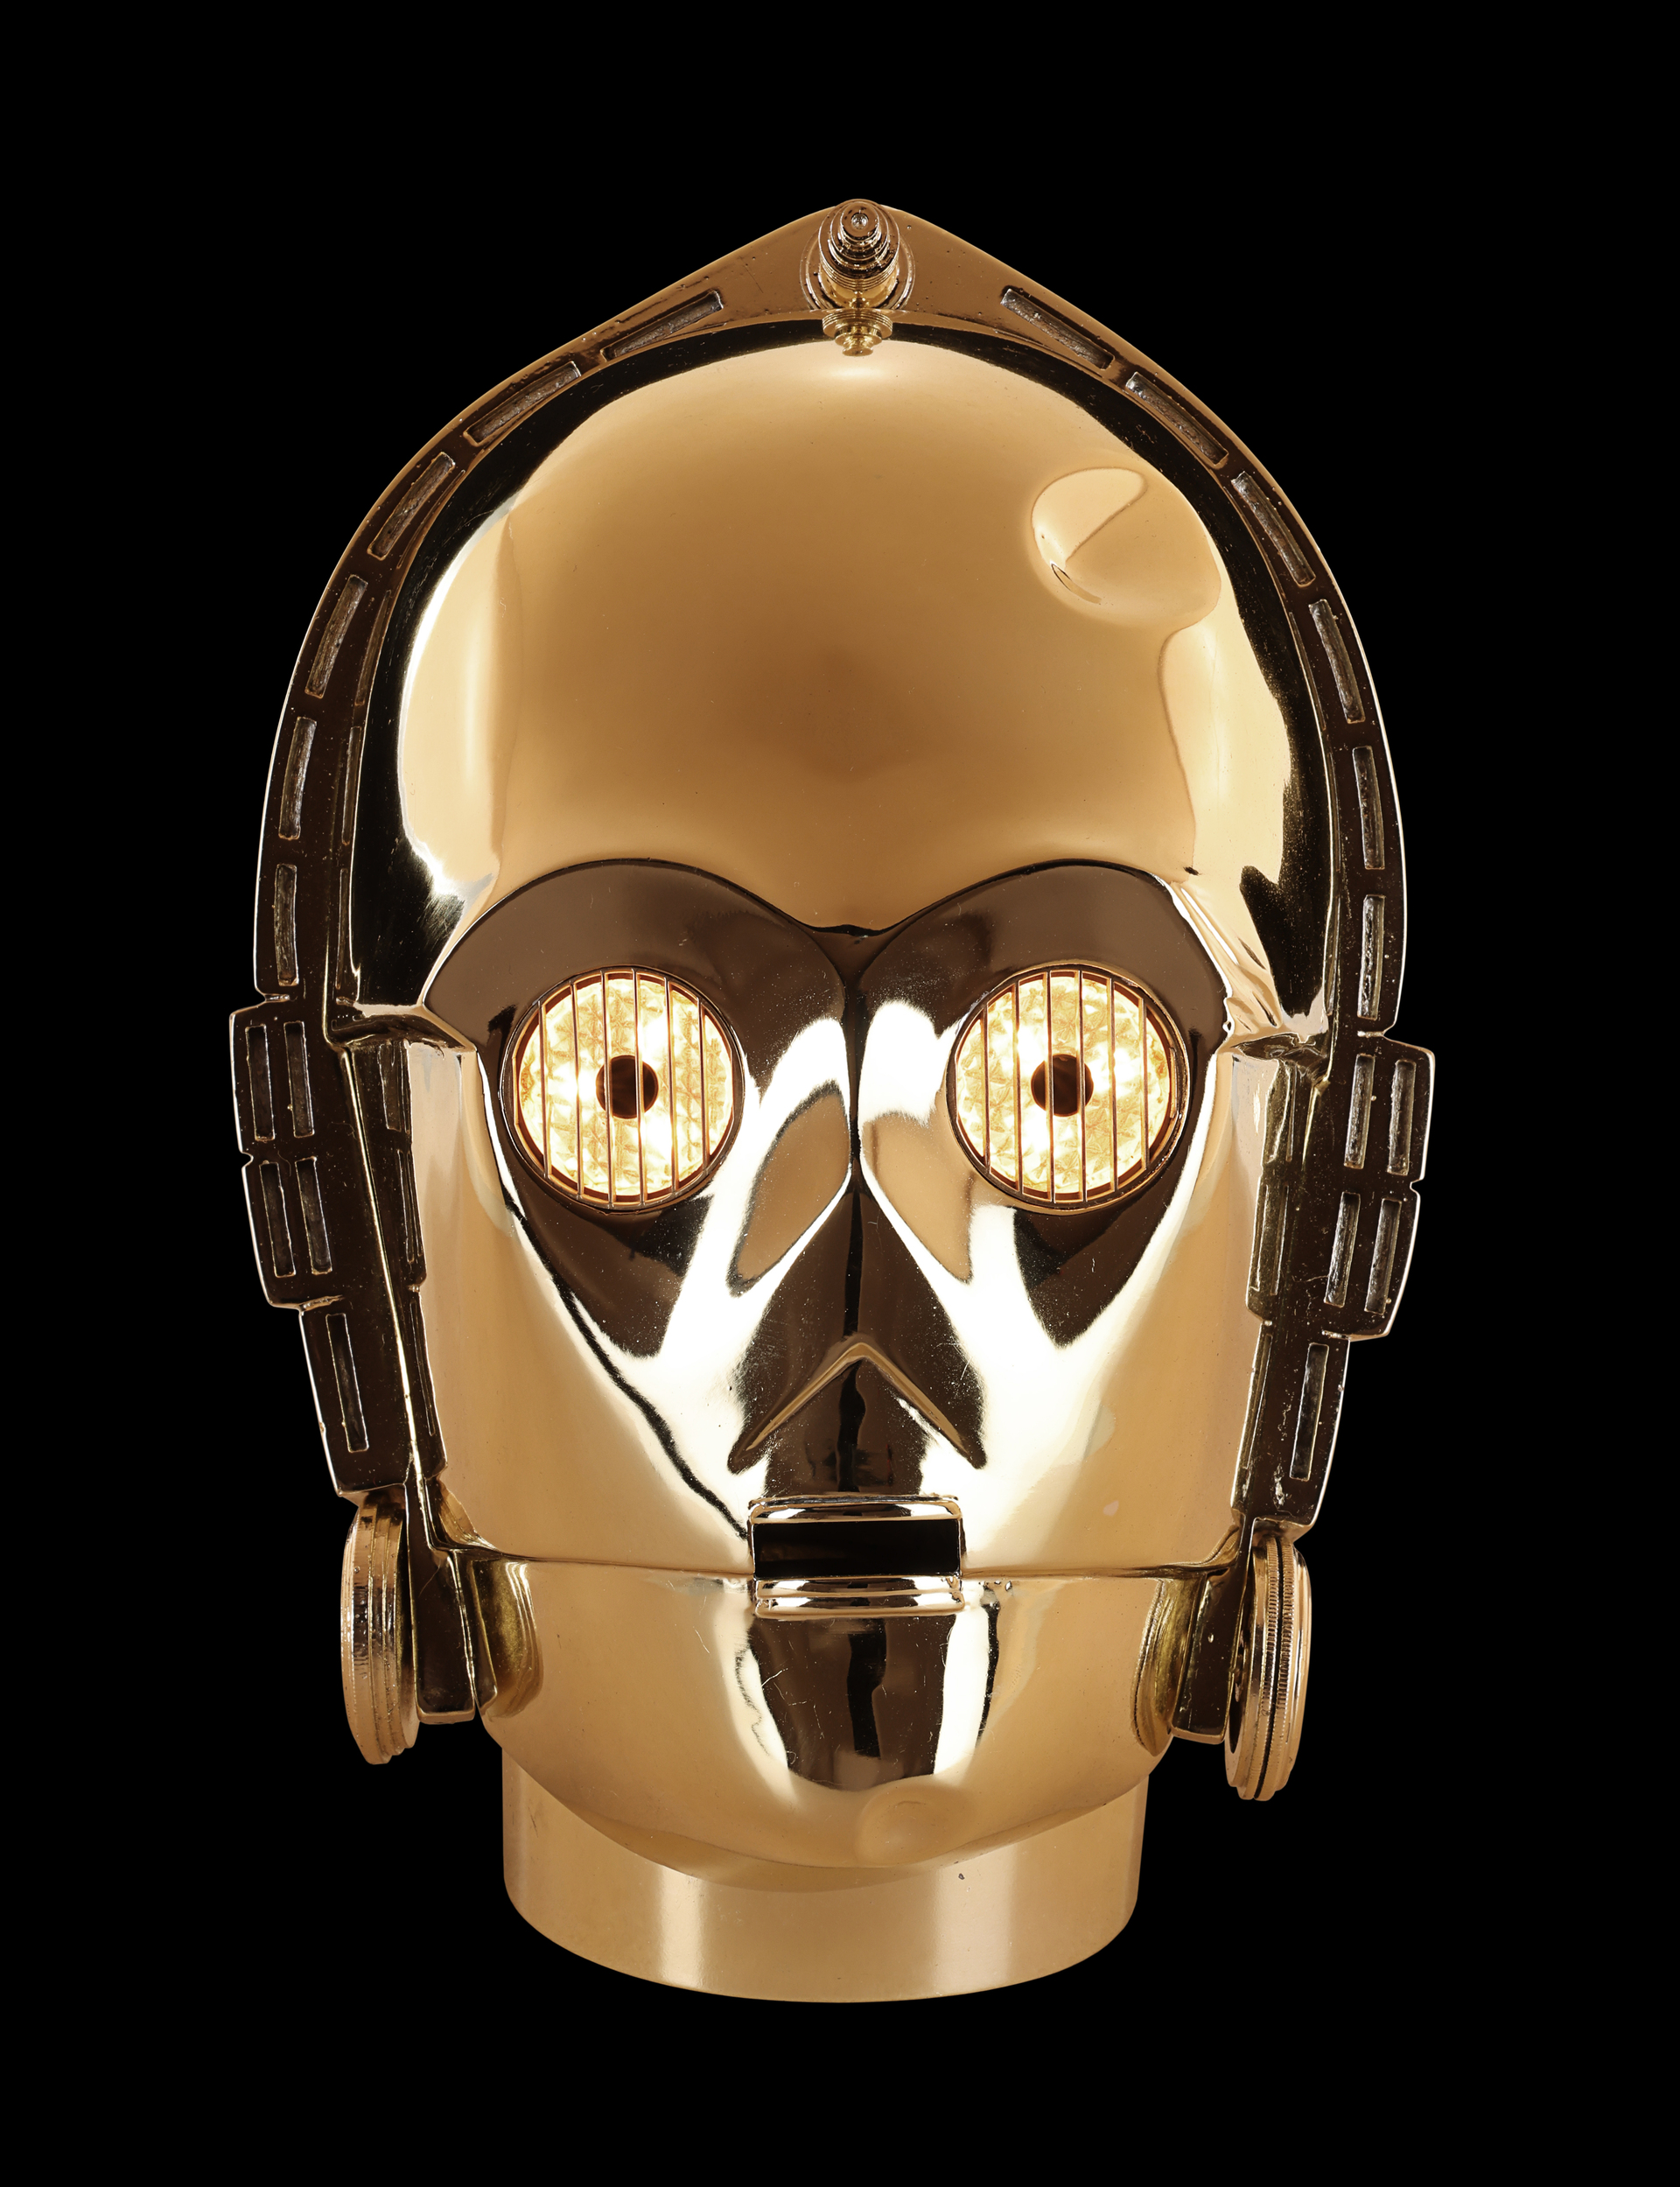 STAR WARS: A NEW HOPE (1977) - Anthony Daniels Collection: Screen-matched Light-up C-3PO (Anthony Da - Image 2 of 42